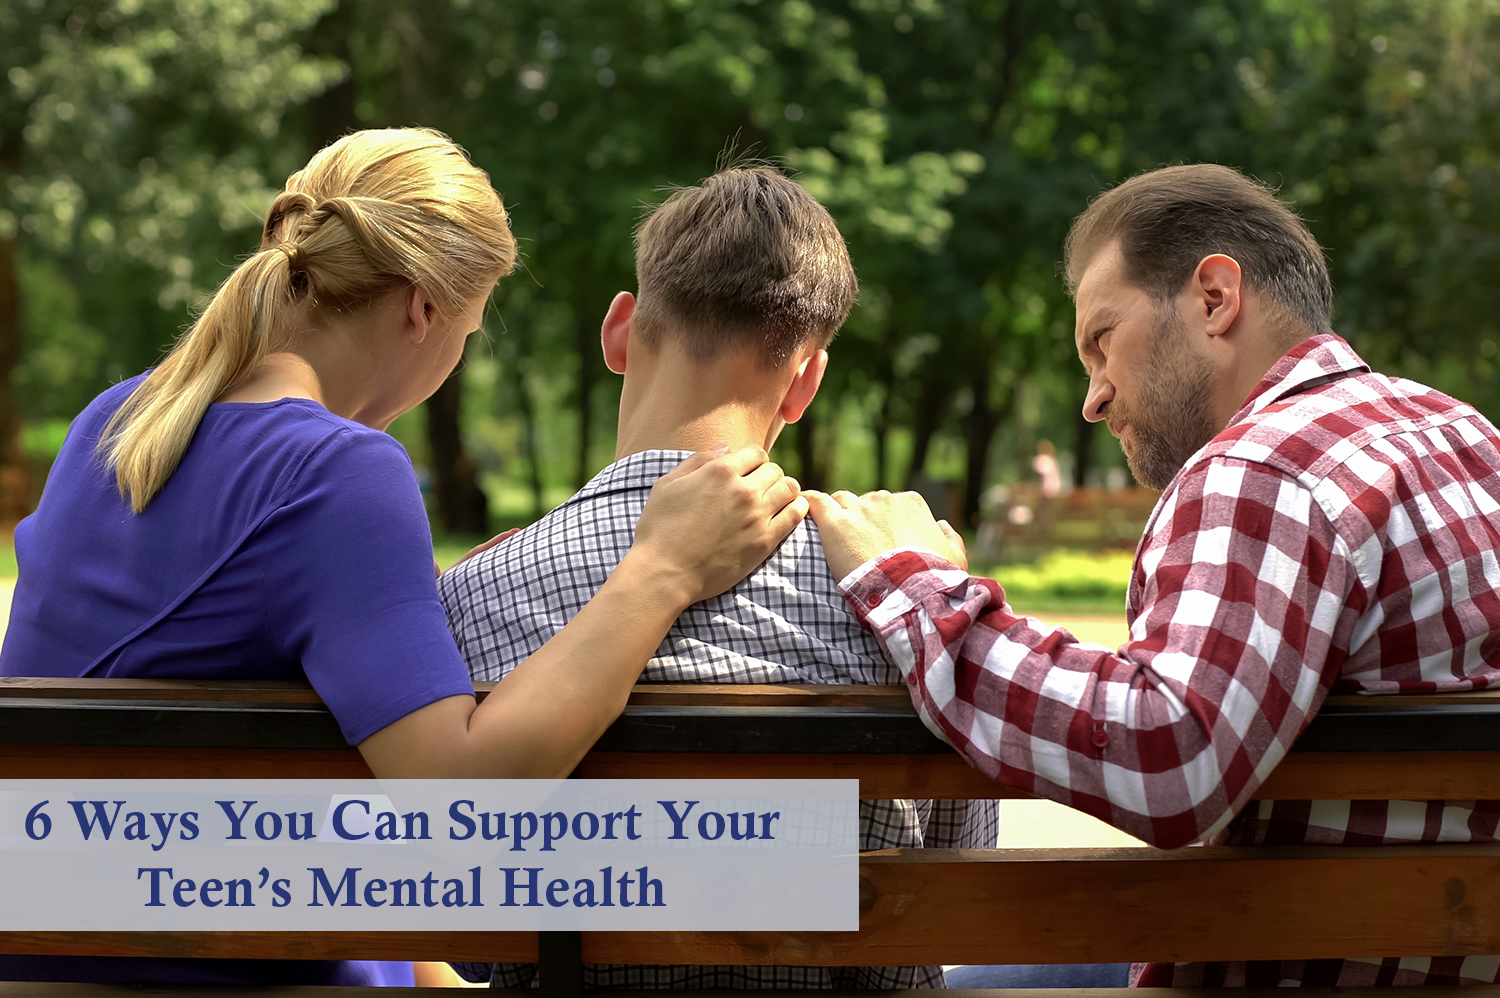 Anonymous mother and father sitting on bench with teen son with backs faced to viewer. Their hands are on the son's shoulders to show support for their teen's mental health.